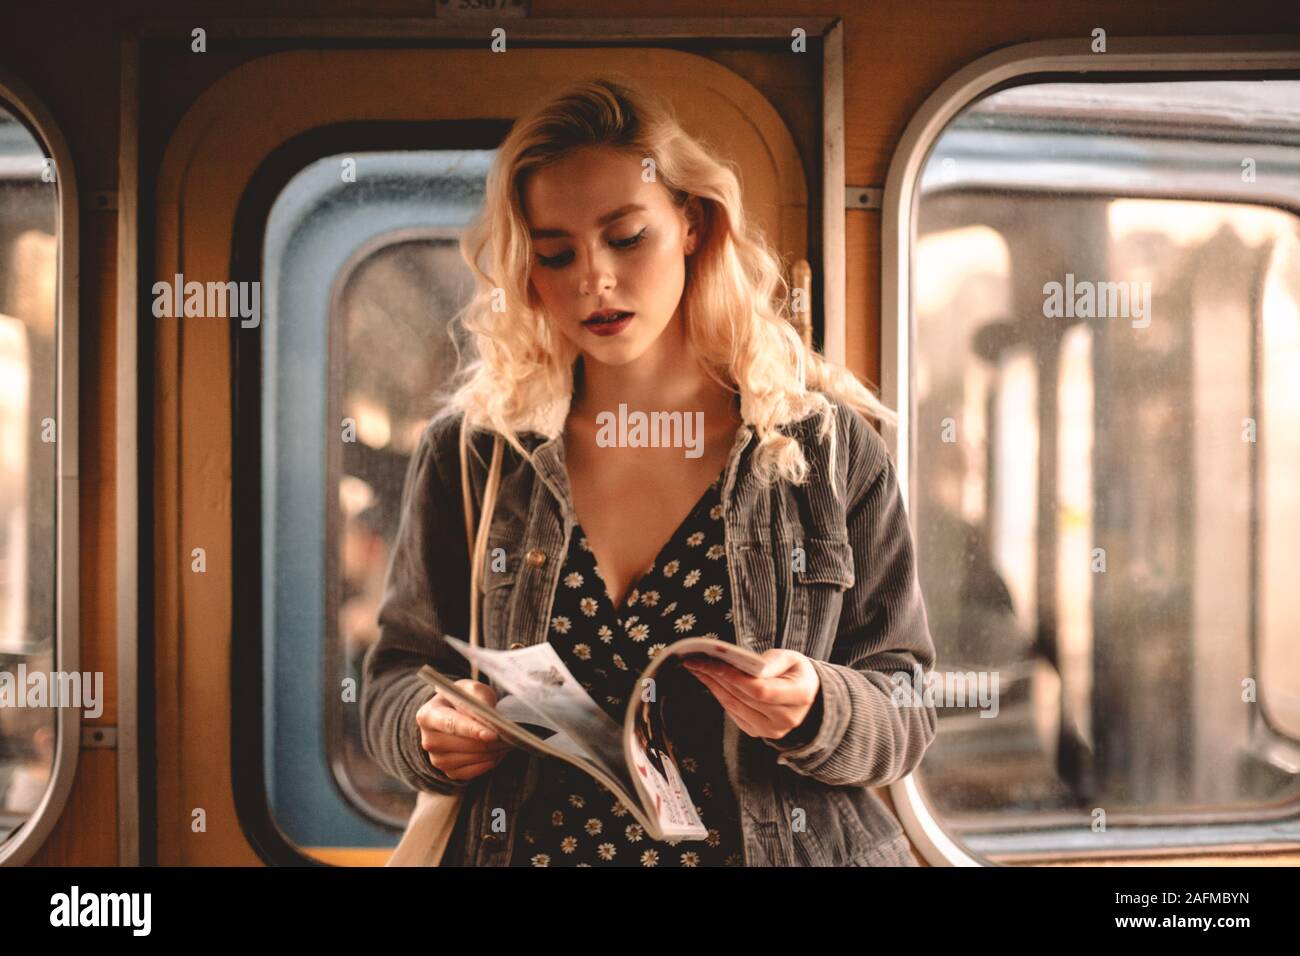 Young woman reading magazine while traveling in subway train Stock Photo